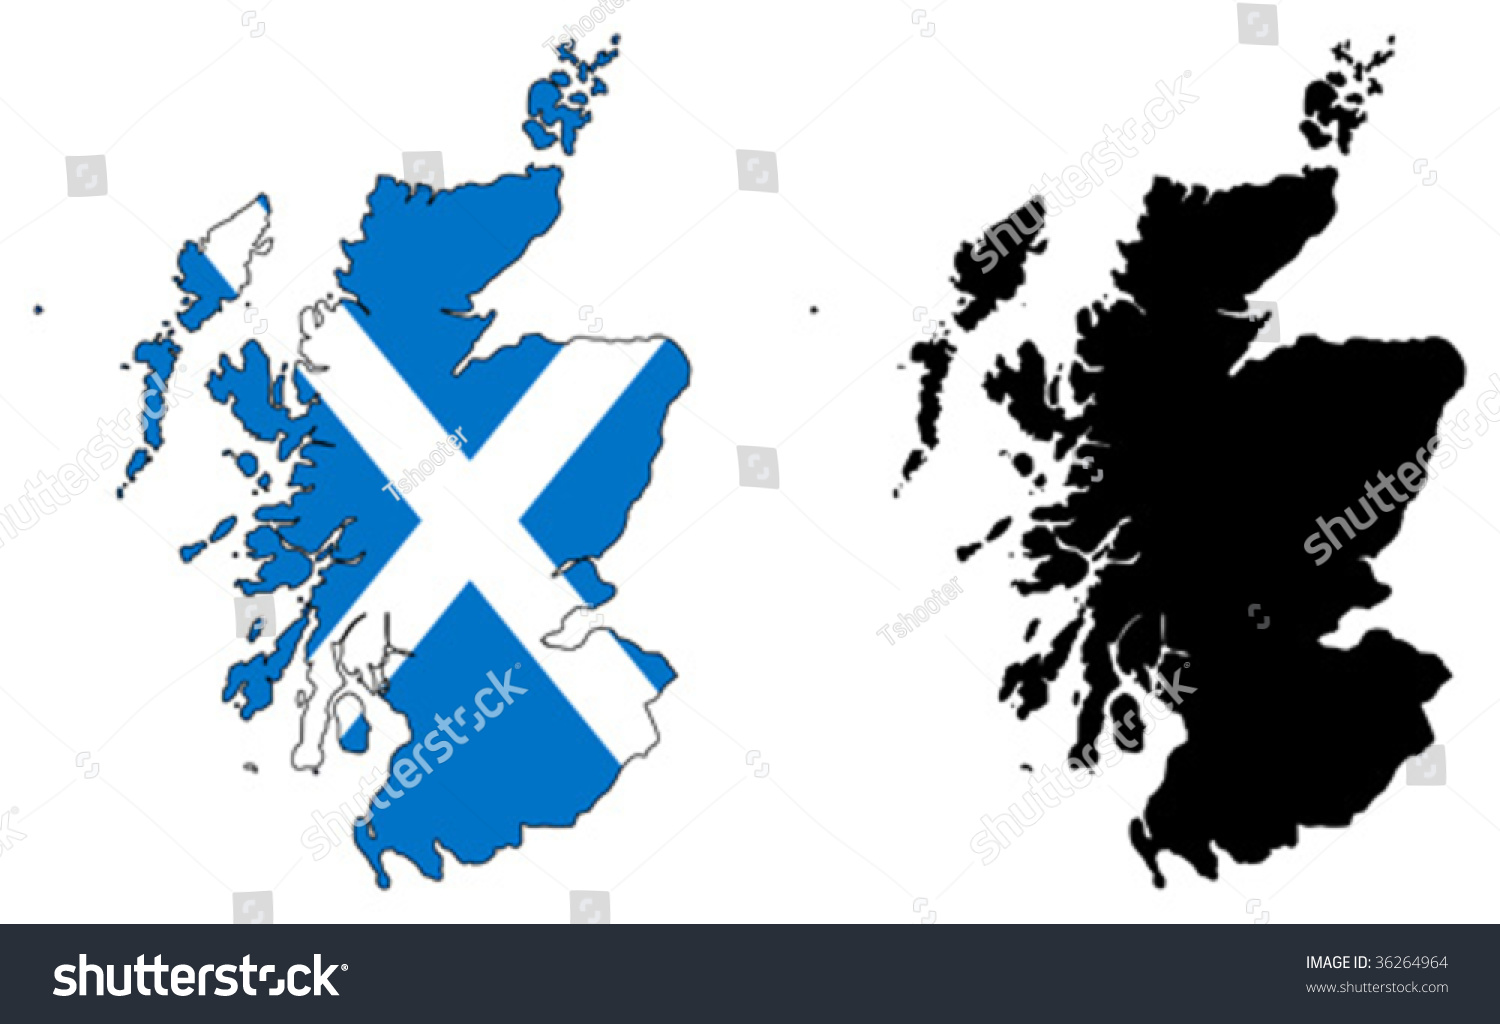 clipart map of scotland - photo #20